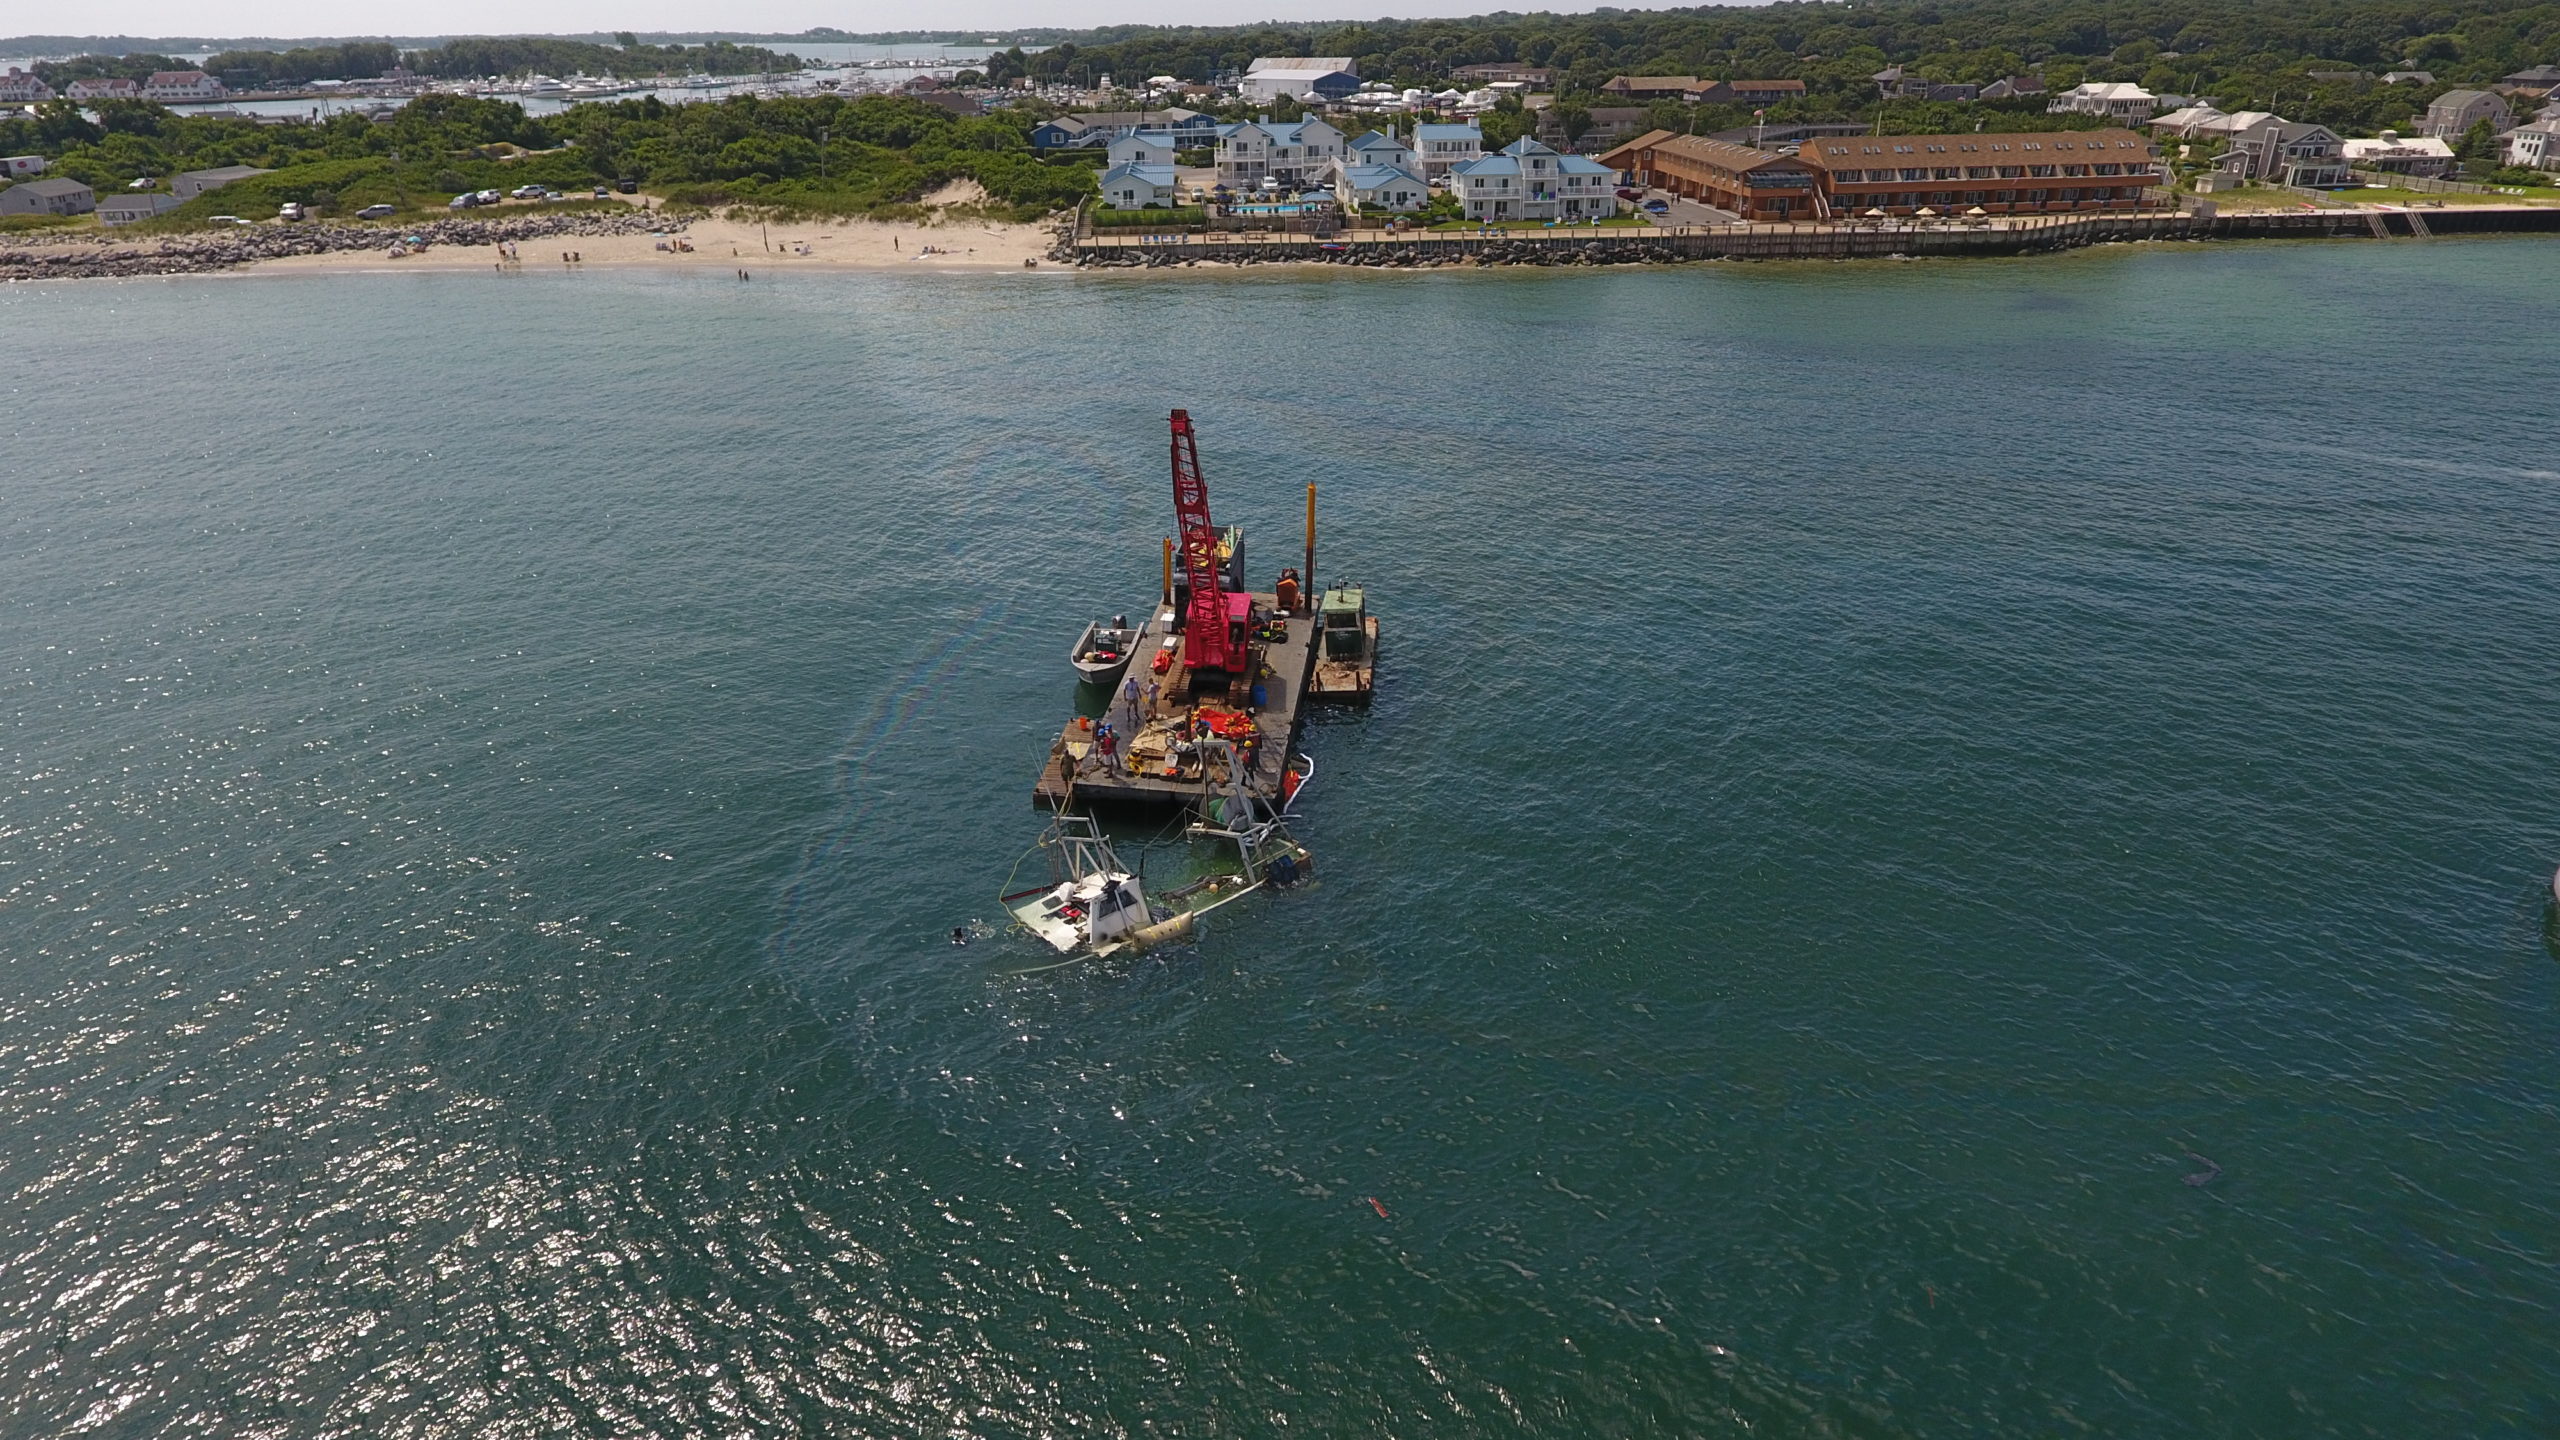 The Petrel was lifted off the bottom of Block Island Sound on Wednesday and Thursday by salvage crews and brought back into Montauk Harbor. 